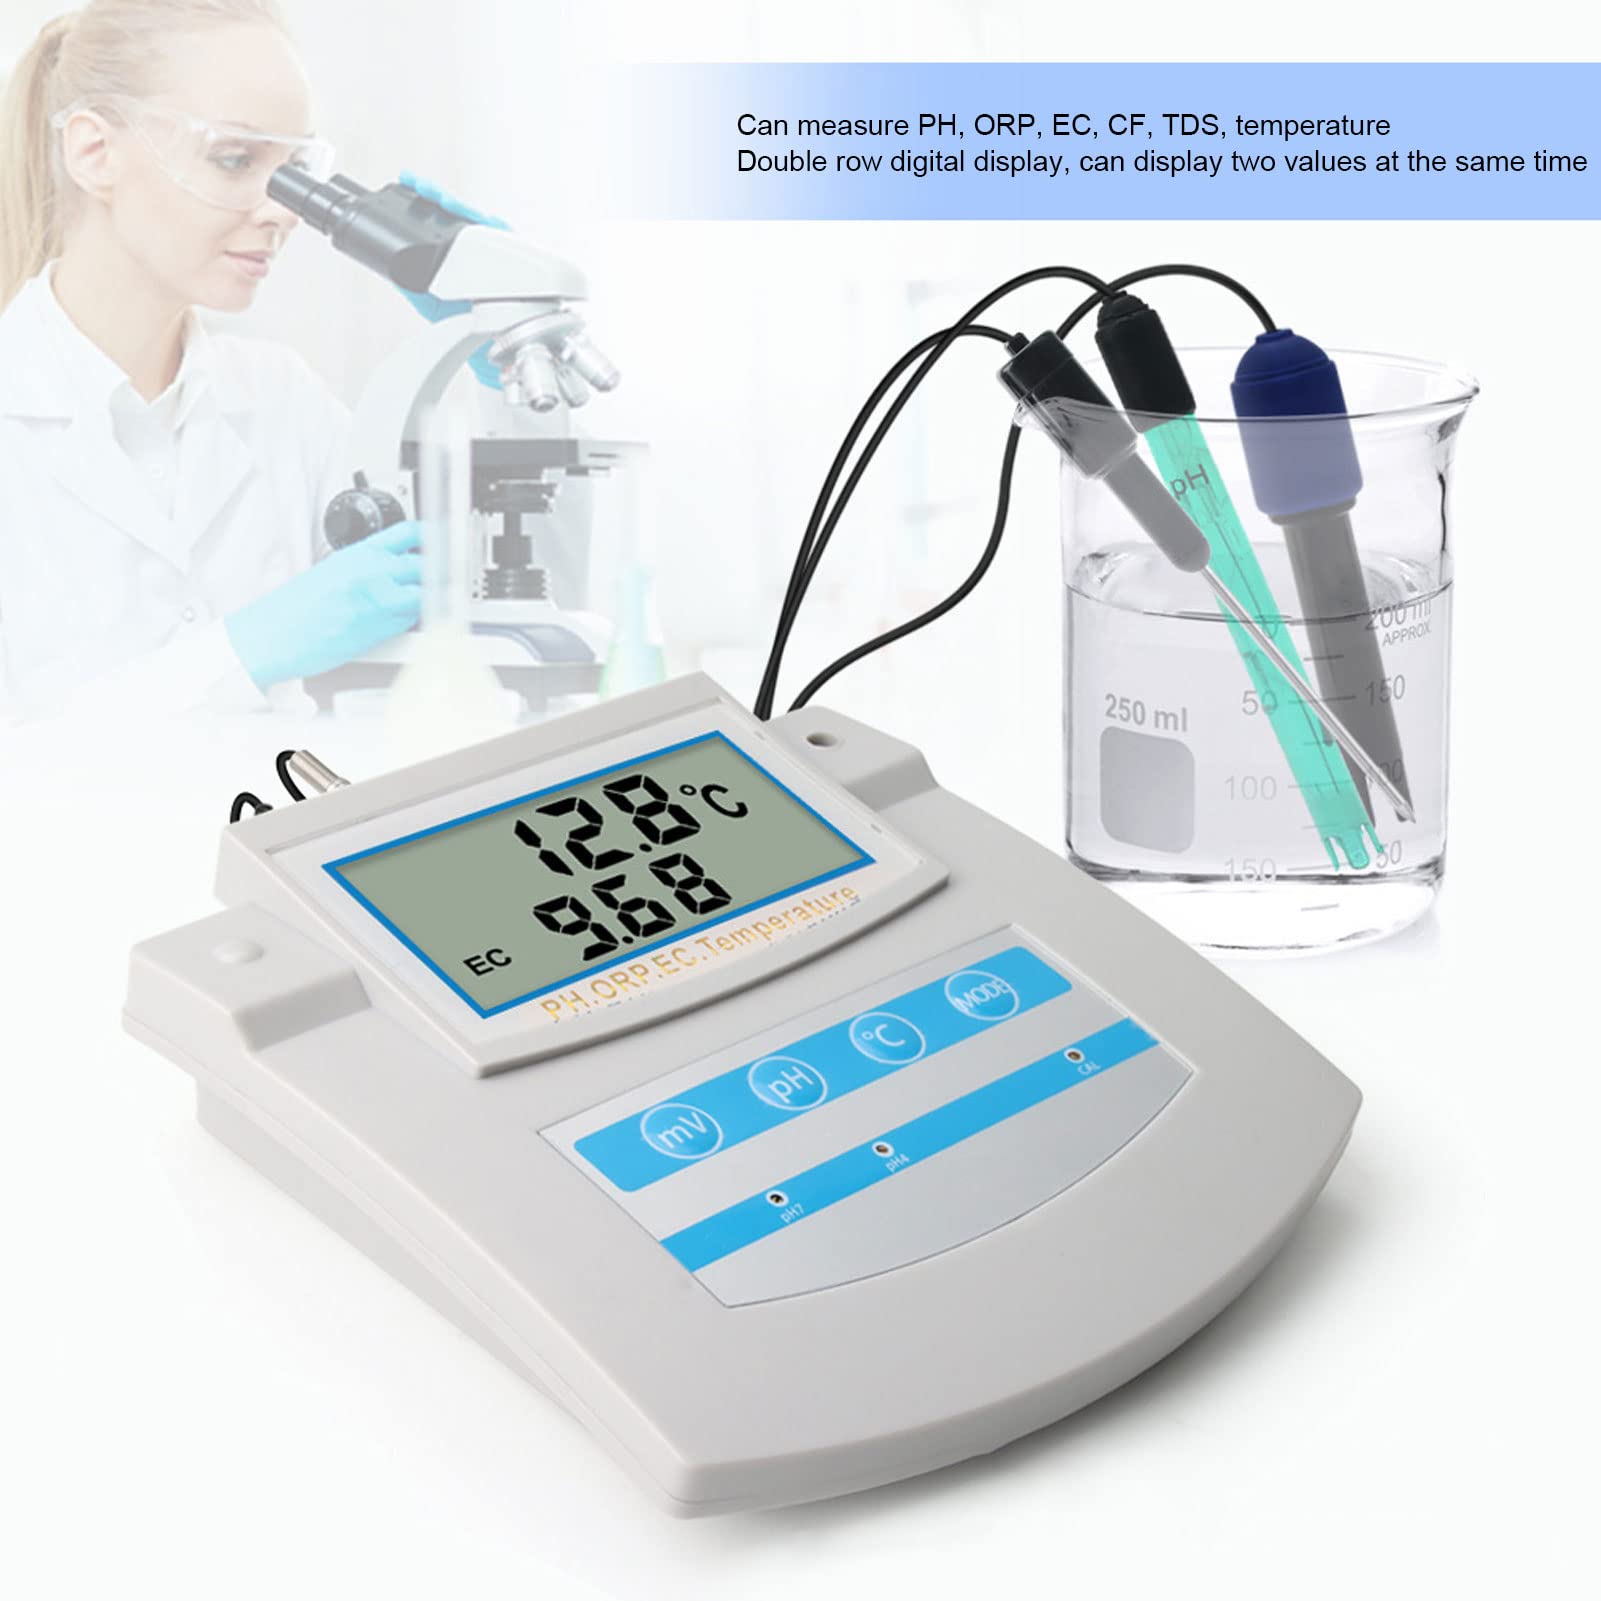 Water Quality Monitor, LCD Display, with High Precise PH, Temperature and EC Probe, 0°C to 50°C Auto Compensate Temperature, 6 in 1 PH ORP EC CF TDS Temperature Tester(USA)